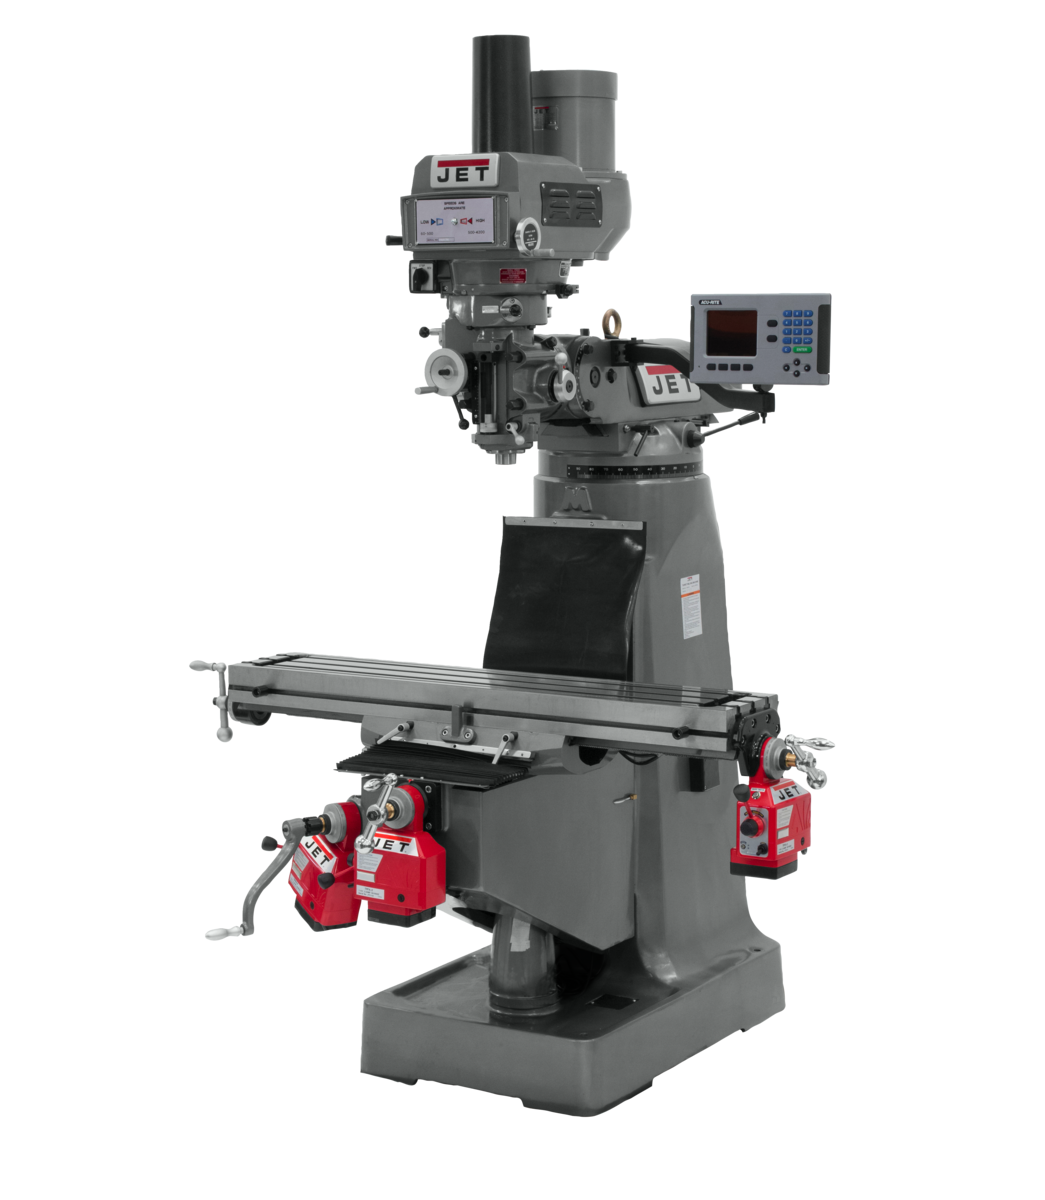 JTM-4VS Mill With 3-Axis ACU-RITE 303 DRO (Knee) With X, Y and Z-Axis Powerfeeds and Power Draw Bar